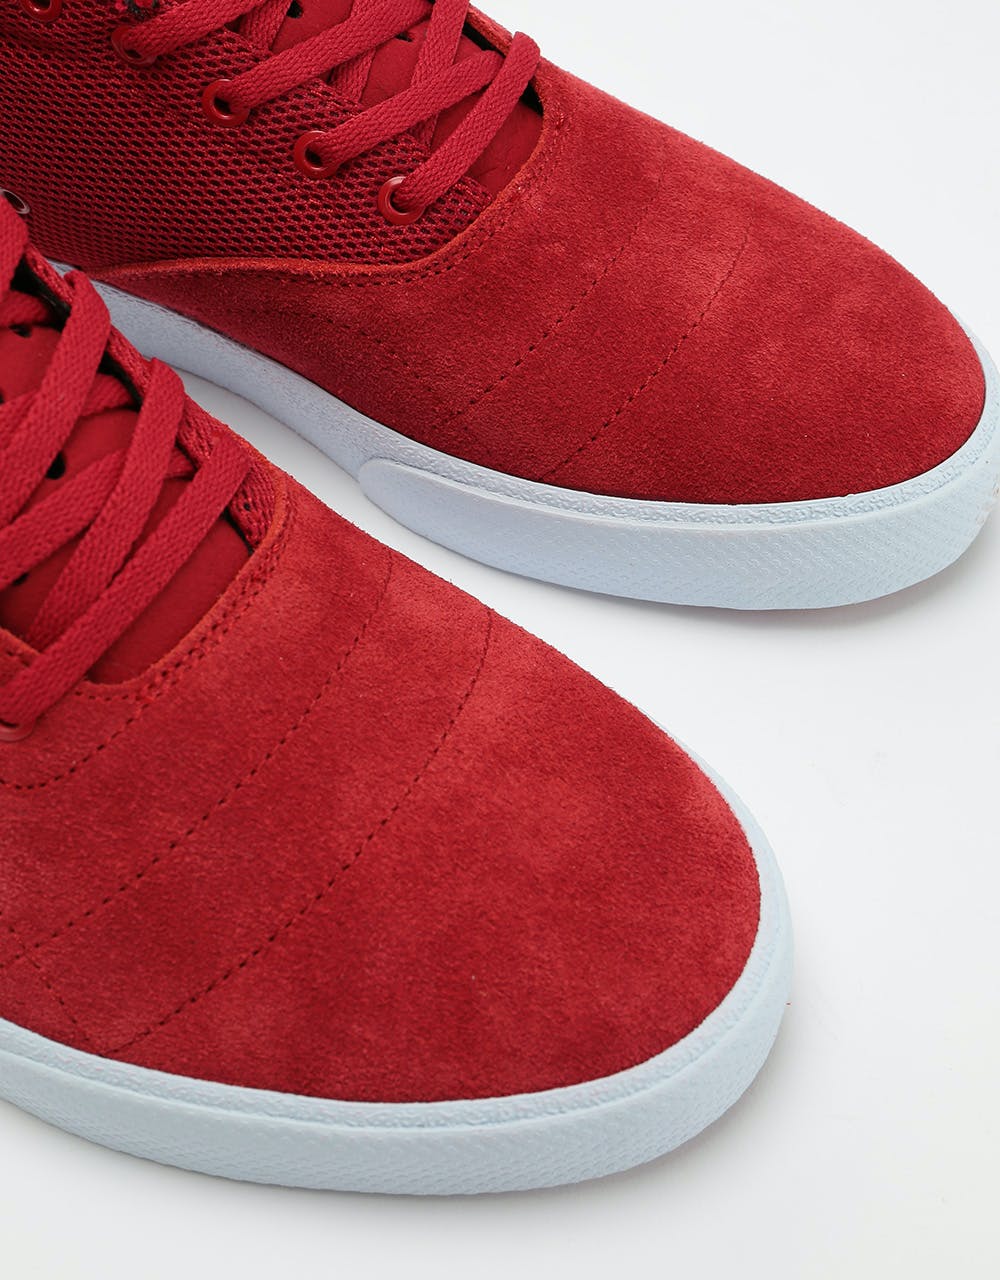 Lakai x Independent Bristol Skate Shoes - Red Suede